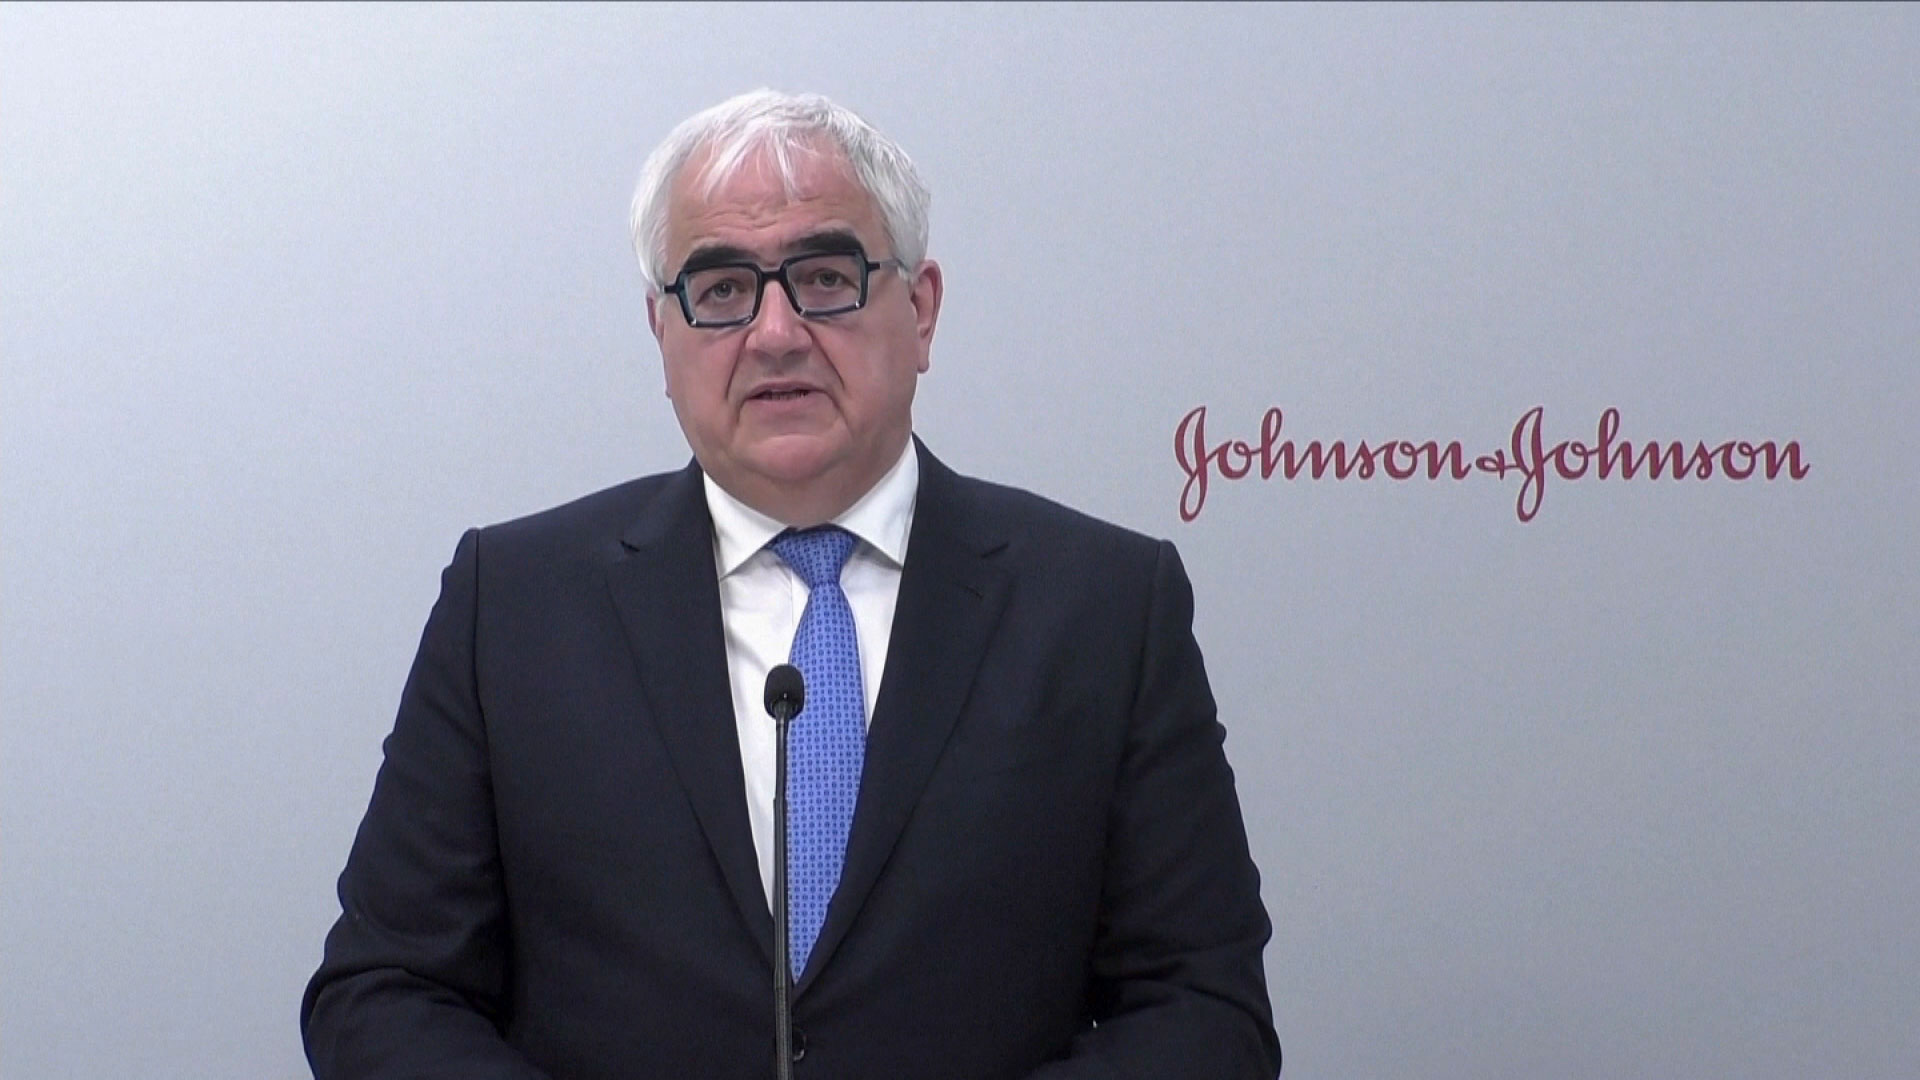 Dr. Paul Stoffels, chief medical officer of Johnson & Johnson, speaks at the G20 Health Summit on May 21.